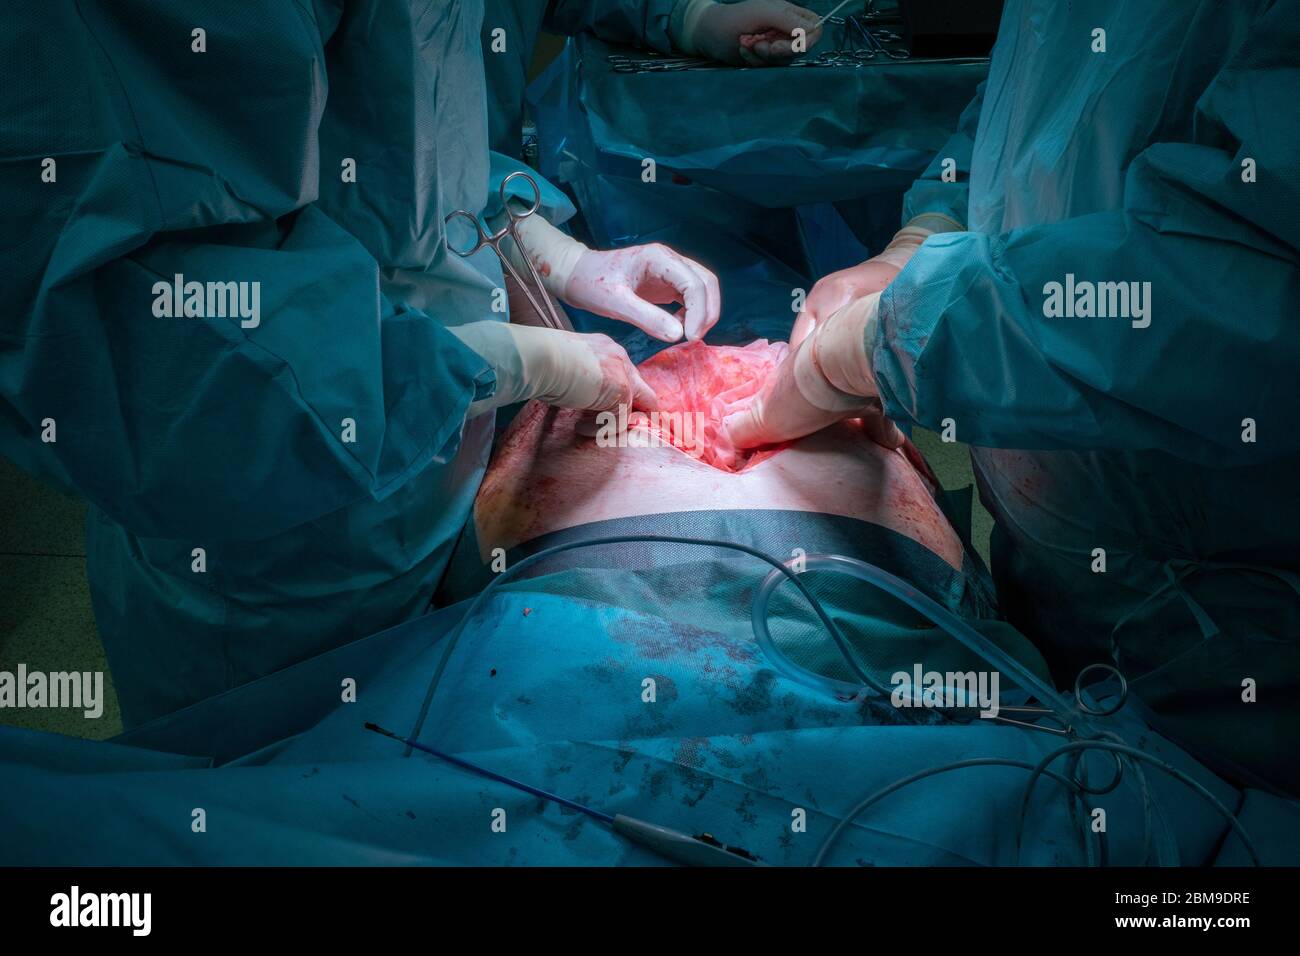 a surgical team performs a surgical abdominal operation Stock Photo